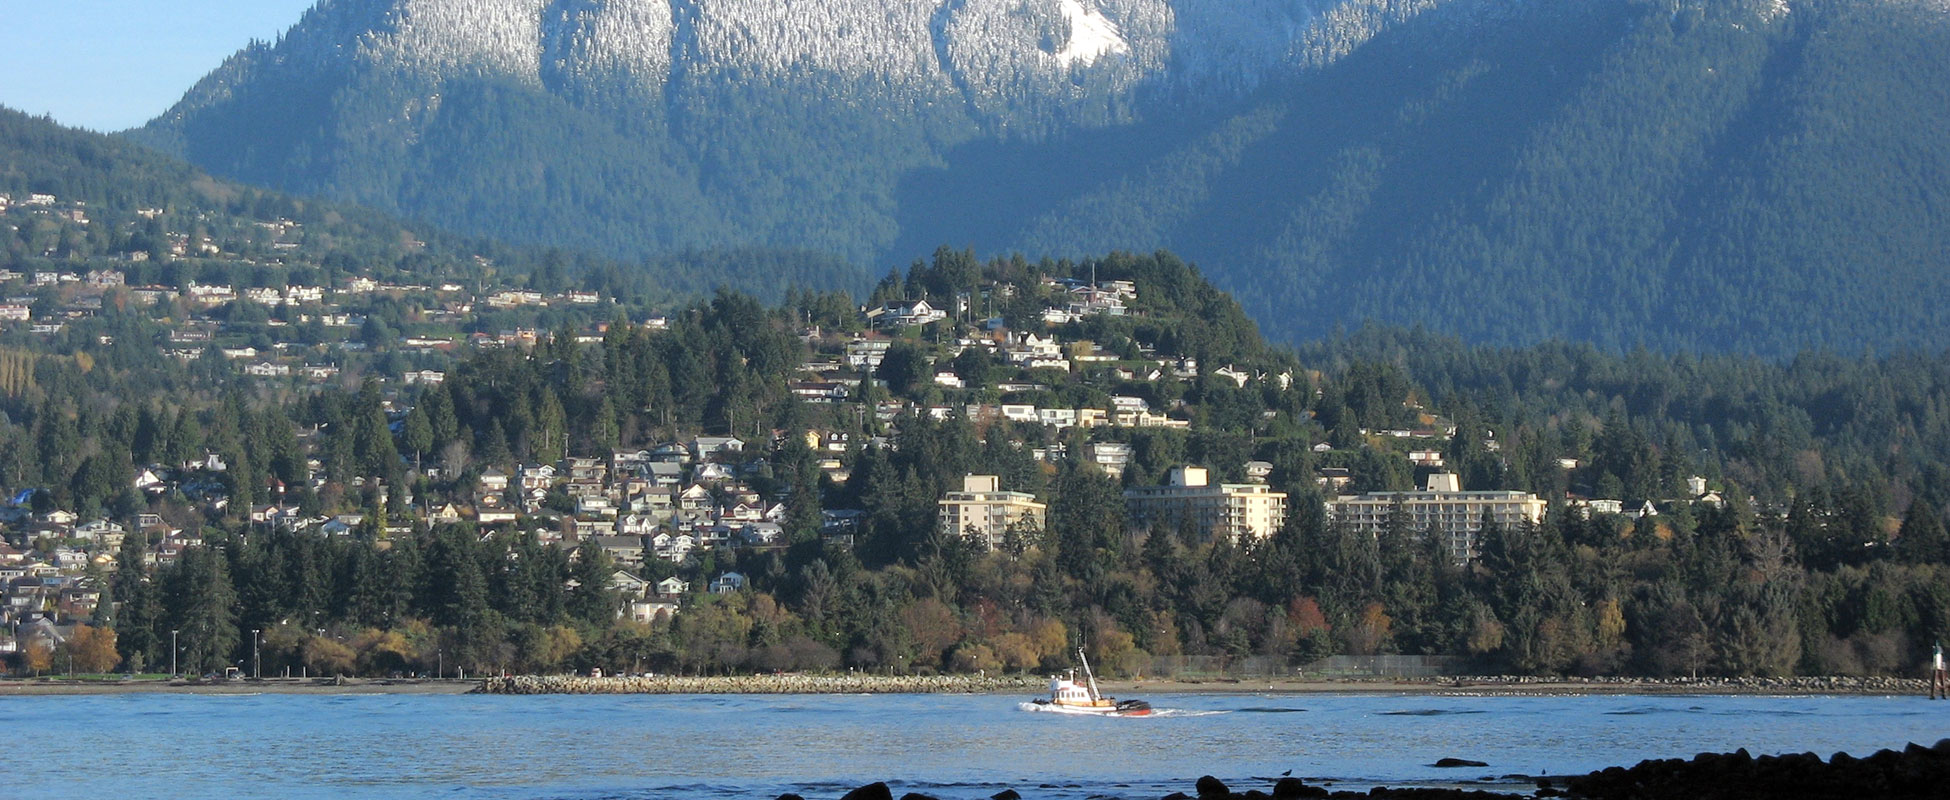 Serving North Vancouver, Vancouver, and outlying areas of the Lower Mainland, including the Sea to Sky Corridor and the Fraser Valley